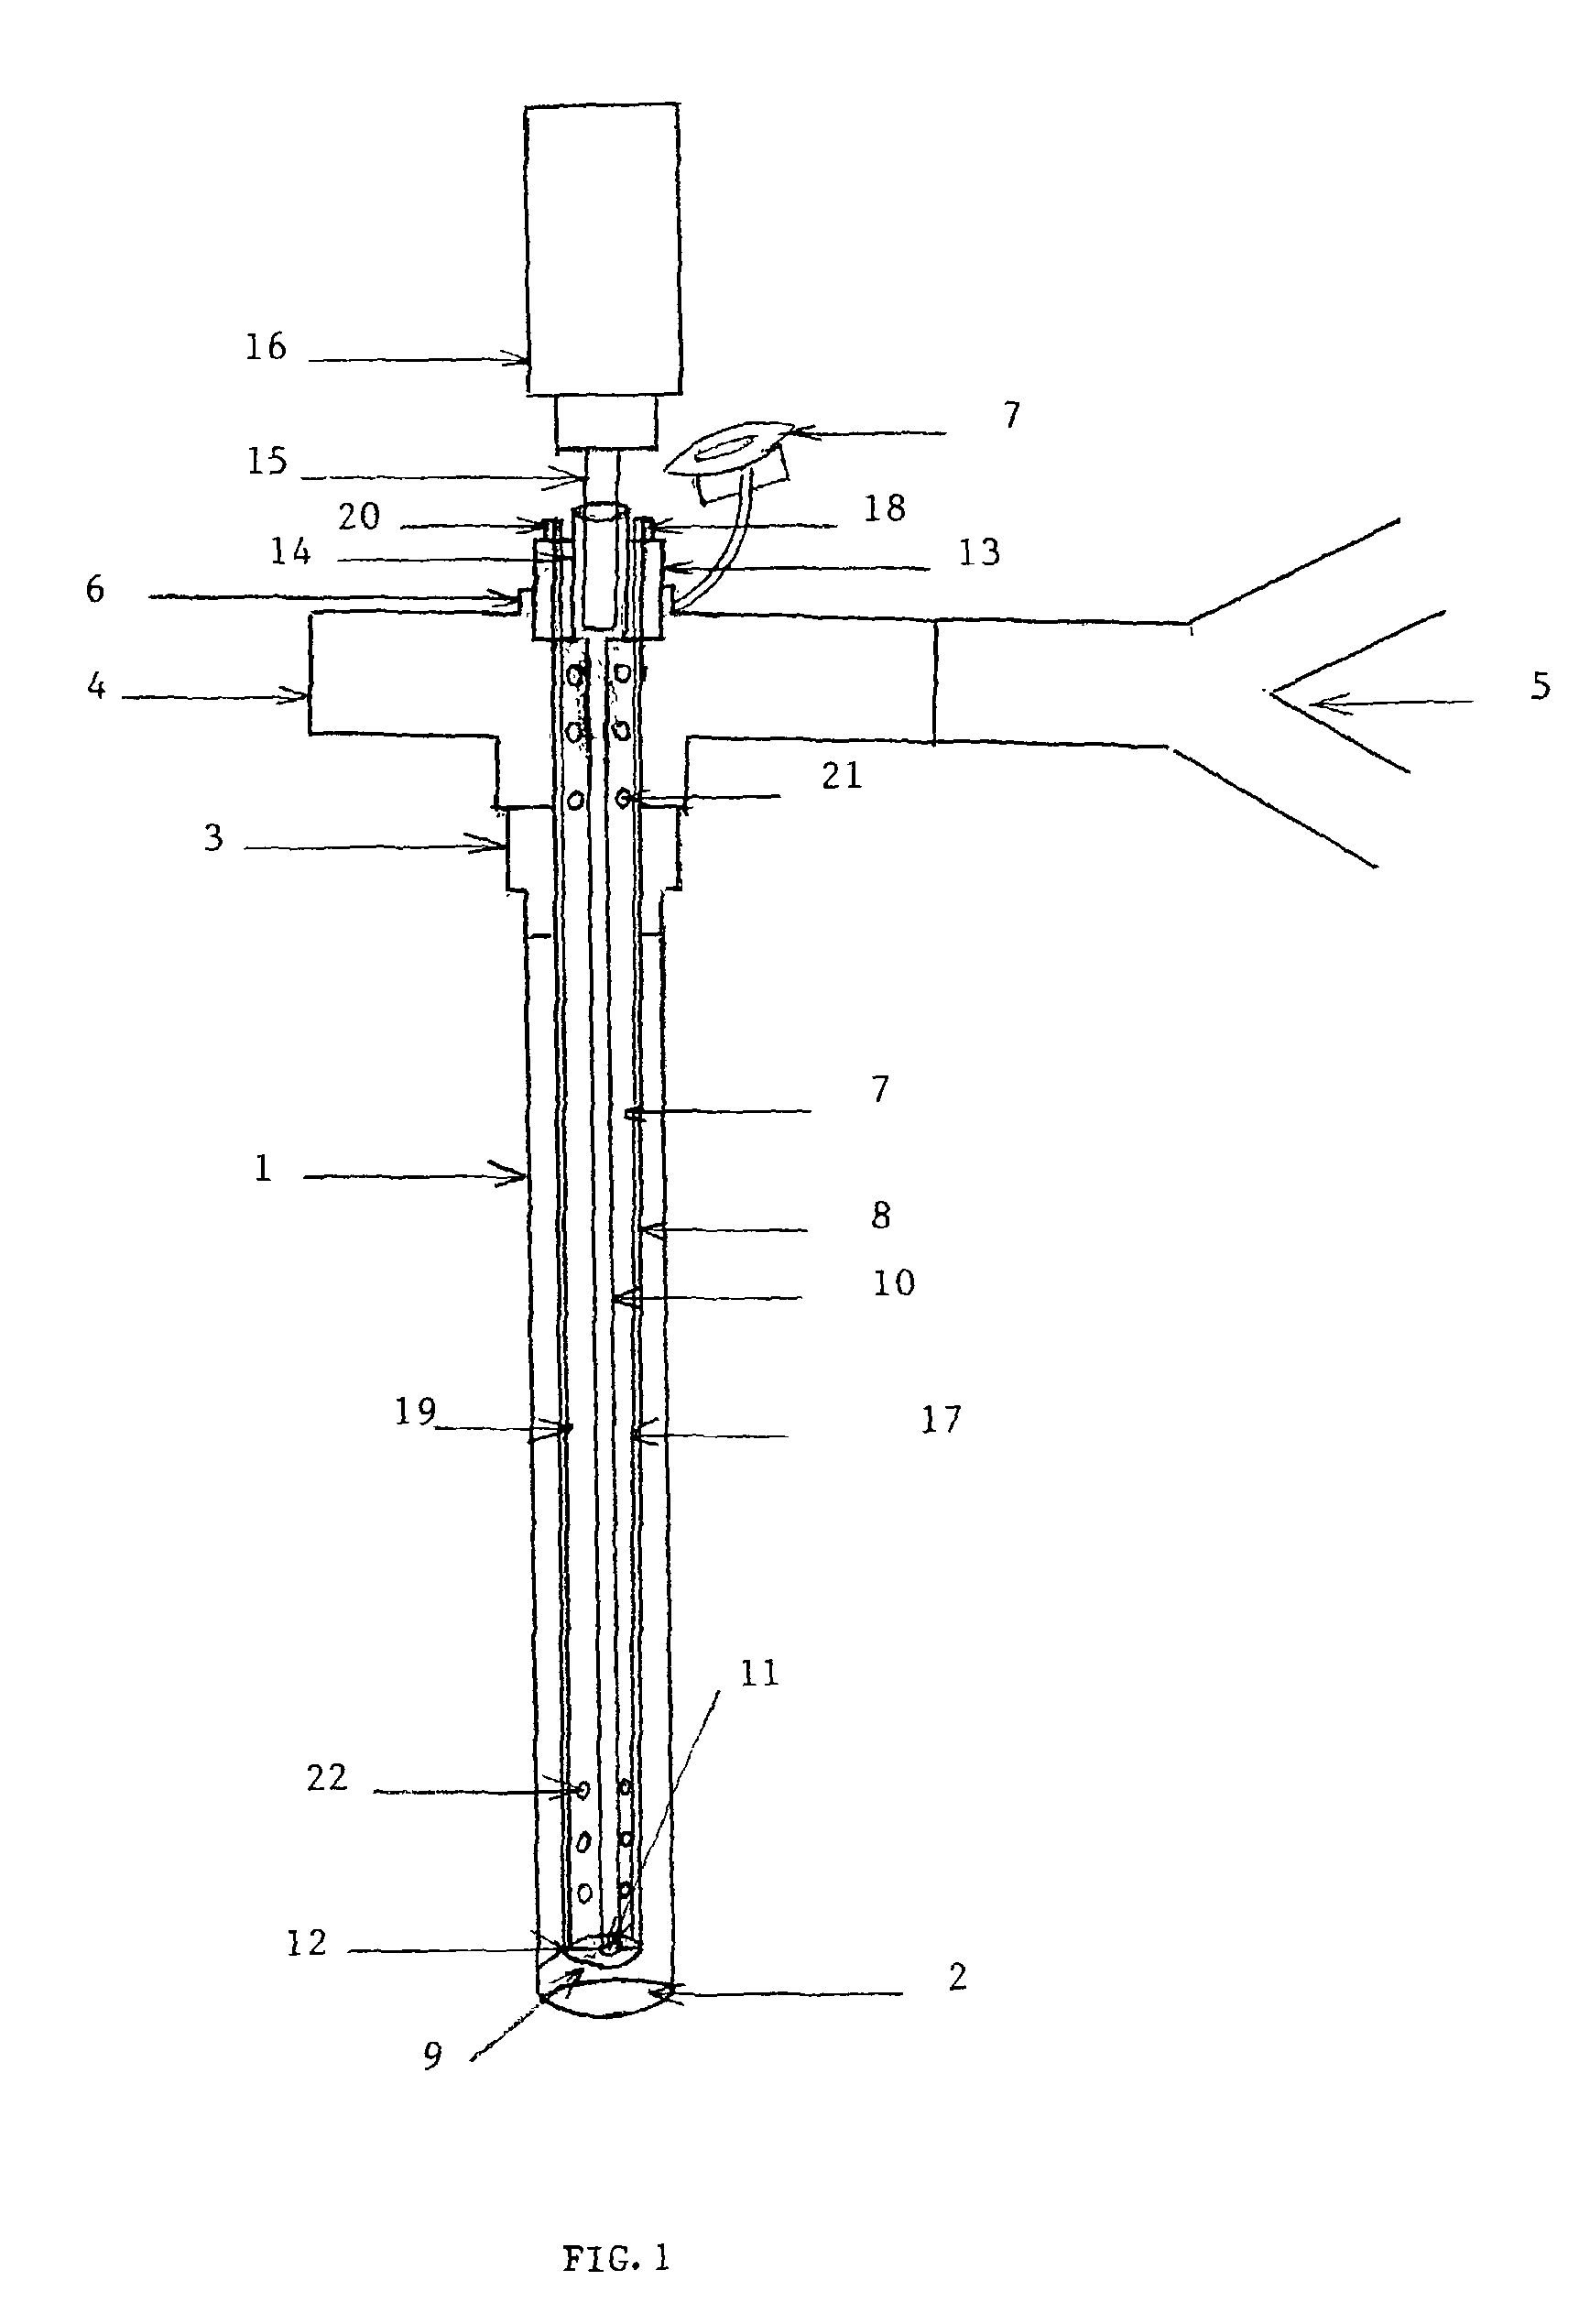 Endotracheal tube with feature for delivering aerosolized medication